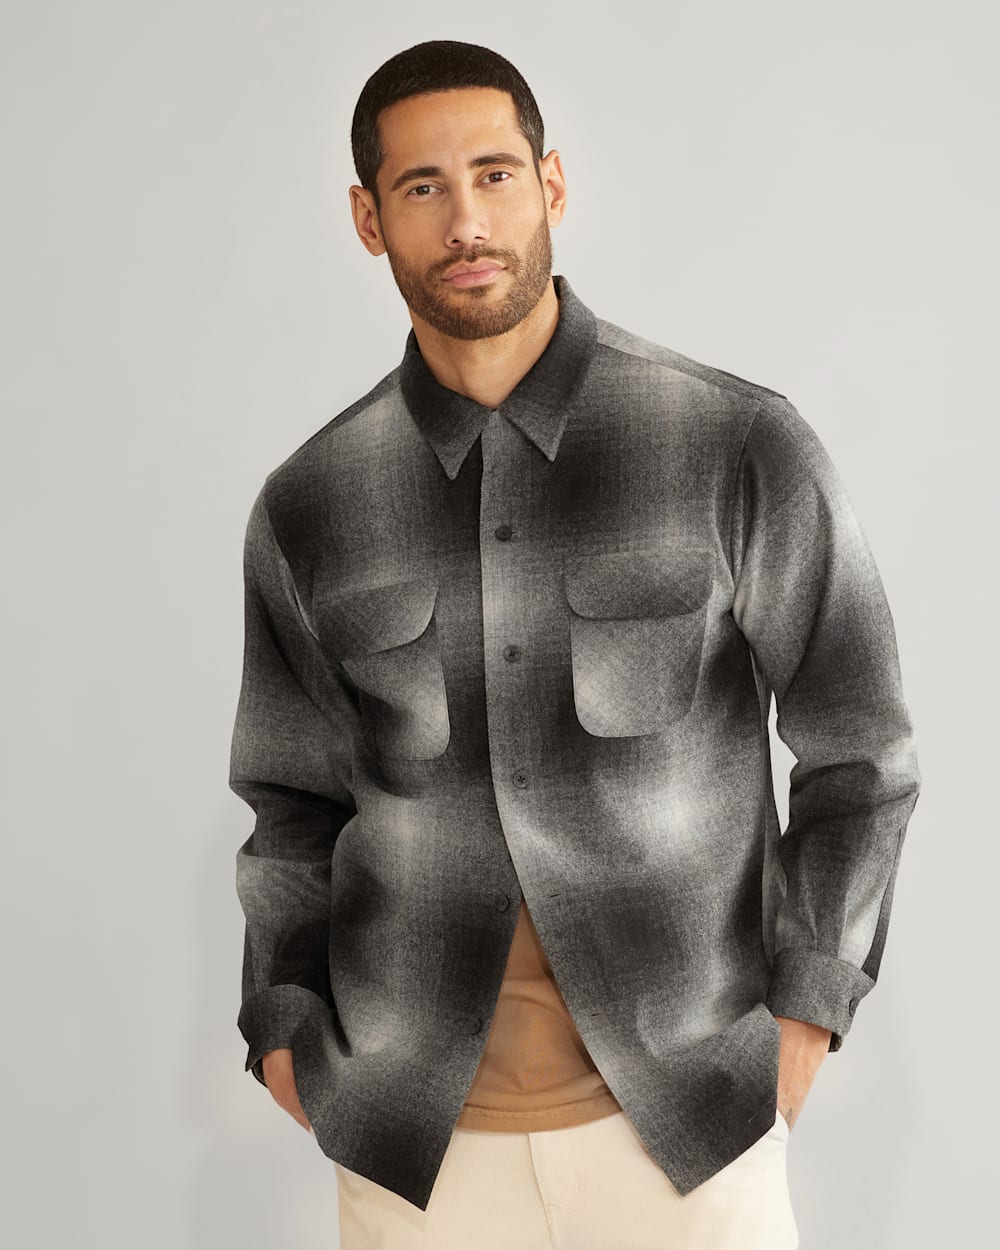 ALTERNATE VIEW OF MEN'S PLAID BOARD SHIRT IN BLACK/WHITE OMBRE image number 5